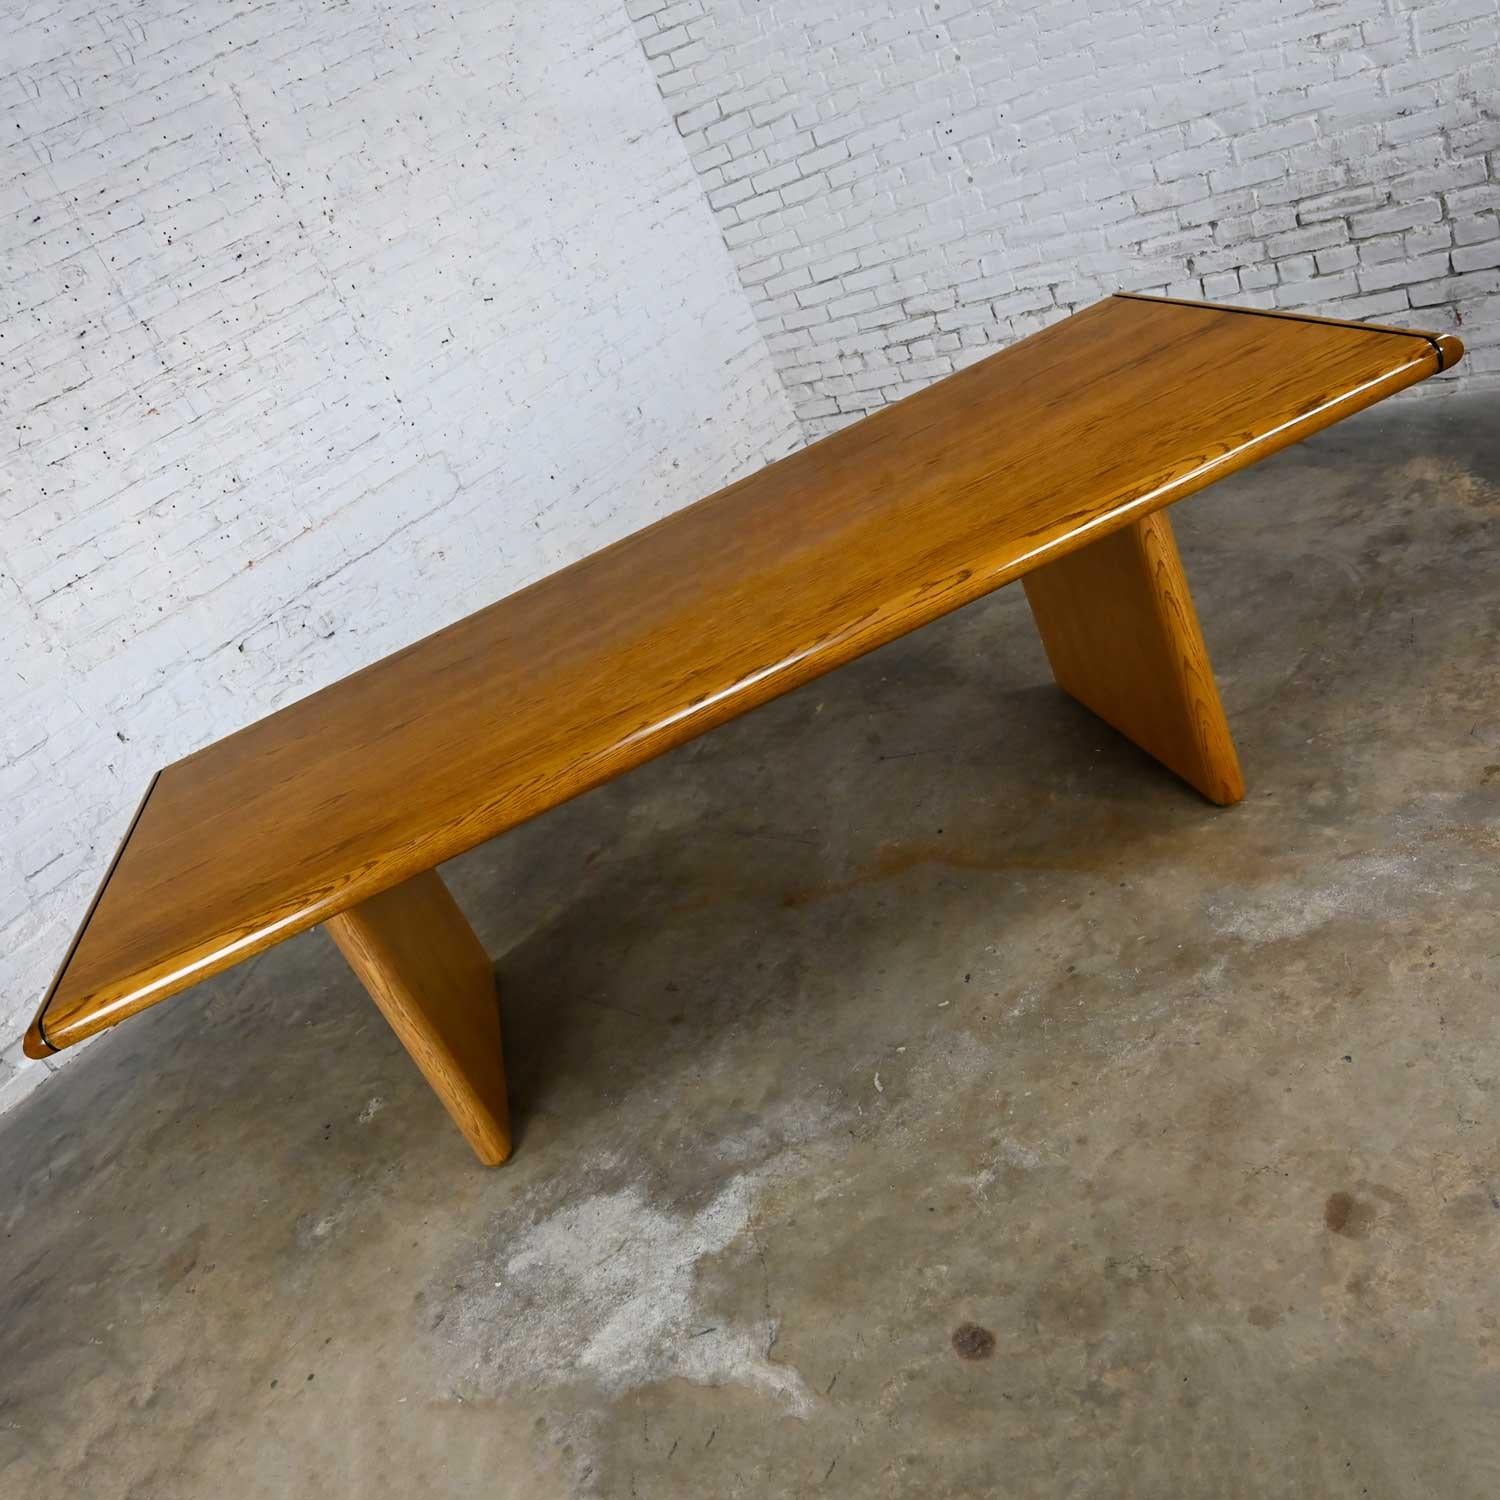 Gorgeous modern oak veneer large trestle style dining or conference table with bullnose edge top and slab style legs. Beautiful condition, keeping in mind that this is vintage and not new so will have signs of use and wear. We have noticed a few